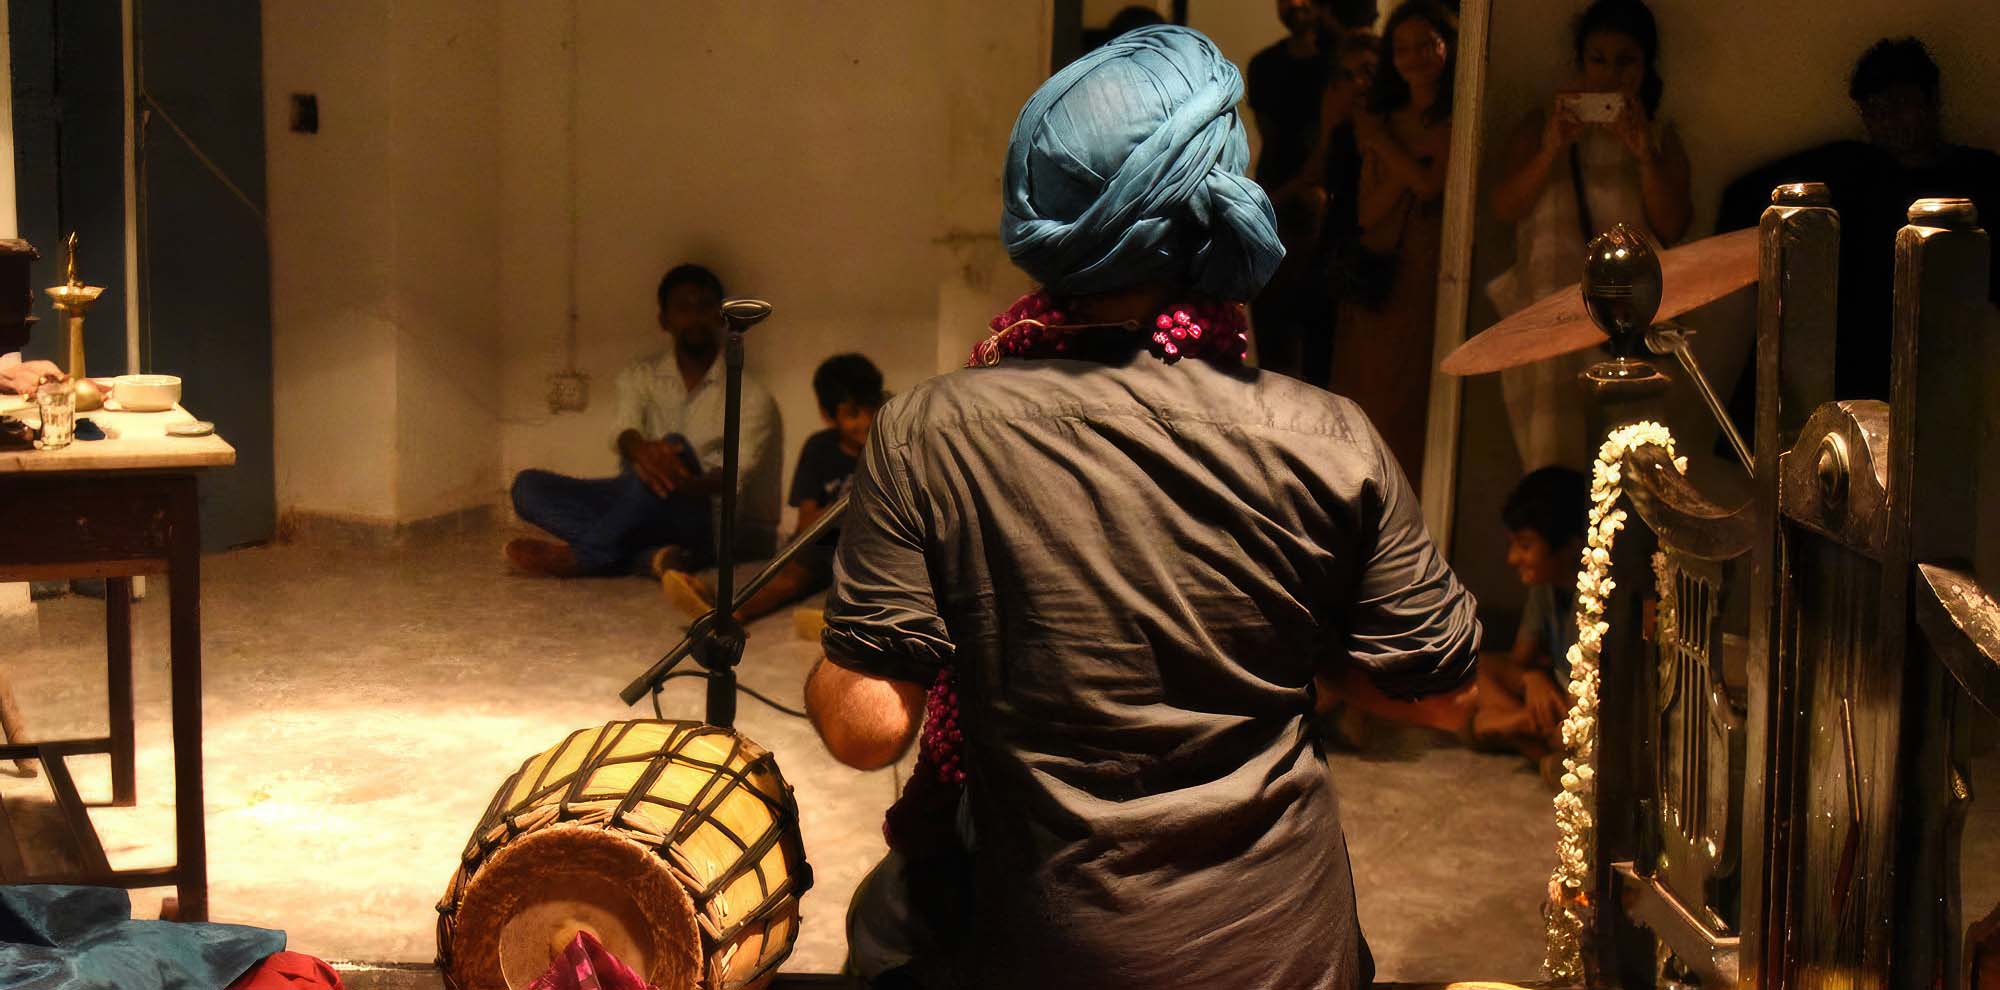 The artist sits on a bed with his back to the viewer, a dhol to his left and a group of people watching him perform at the other end of the room.